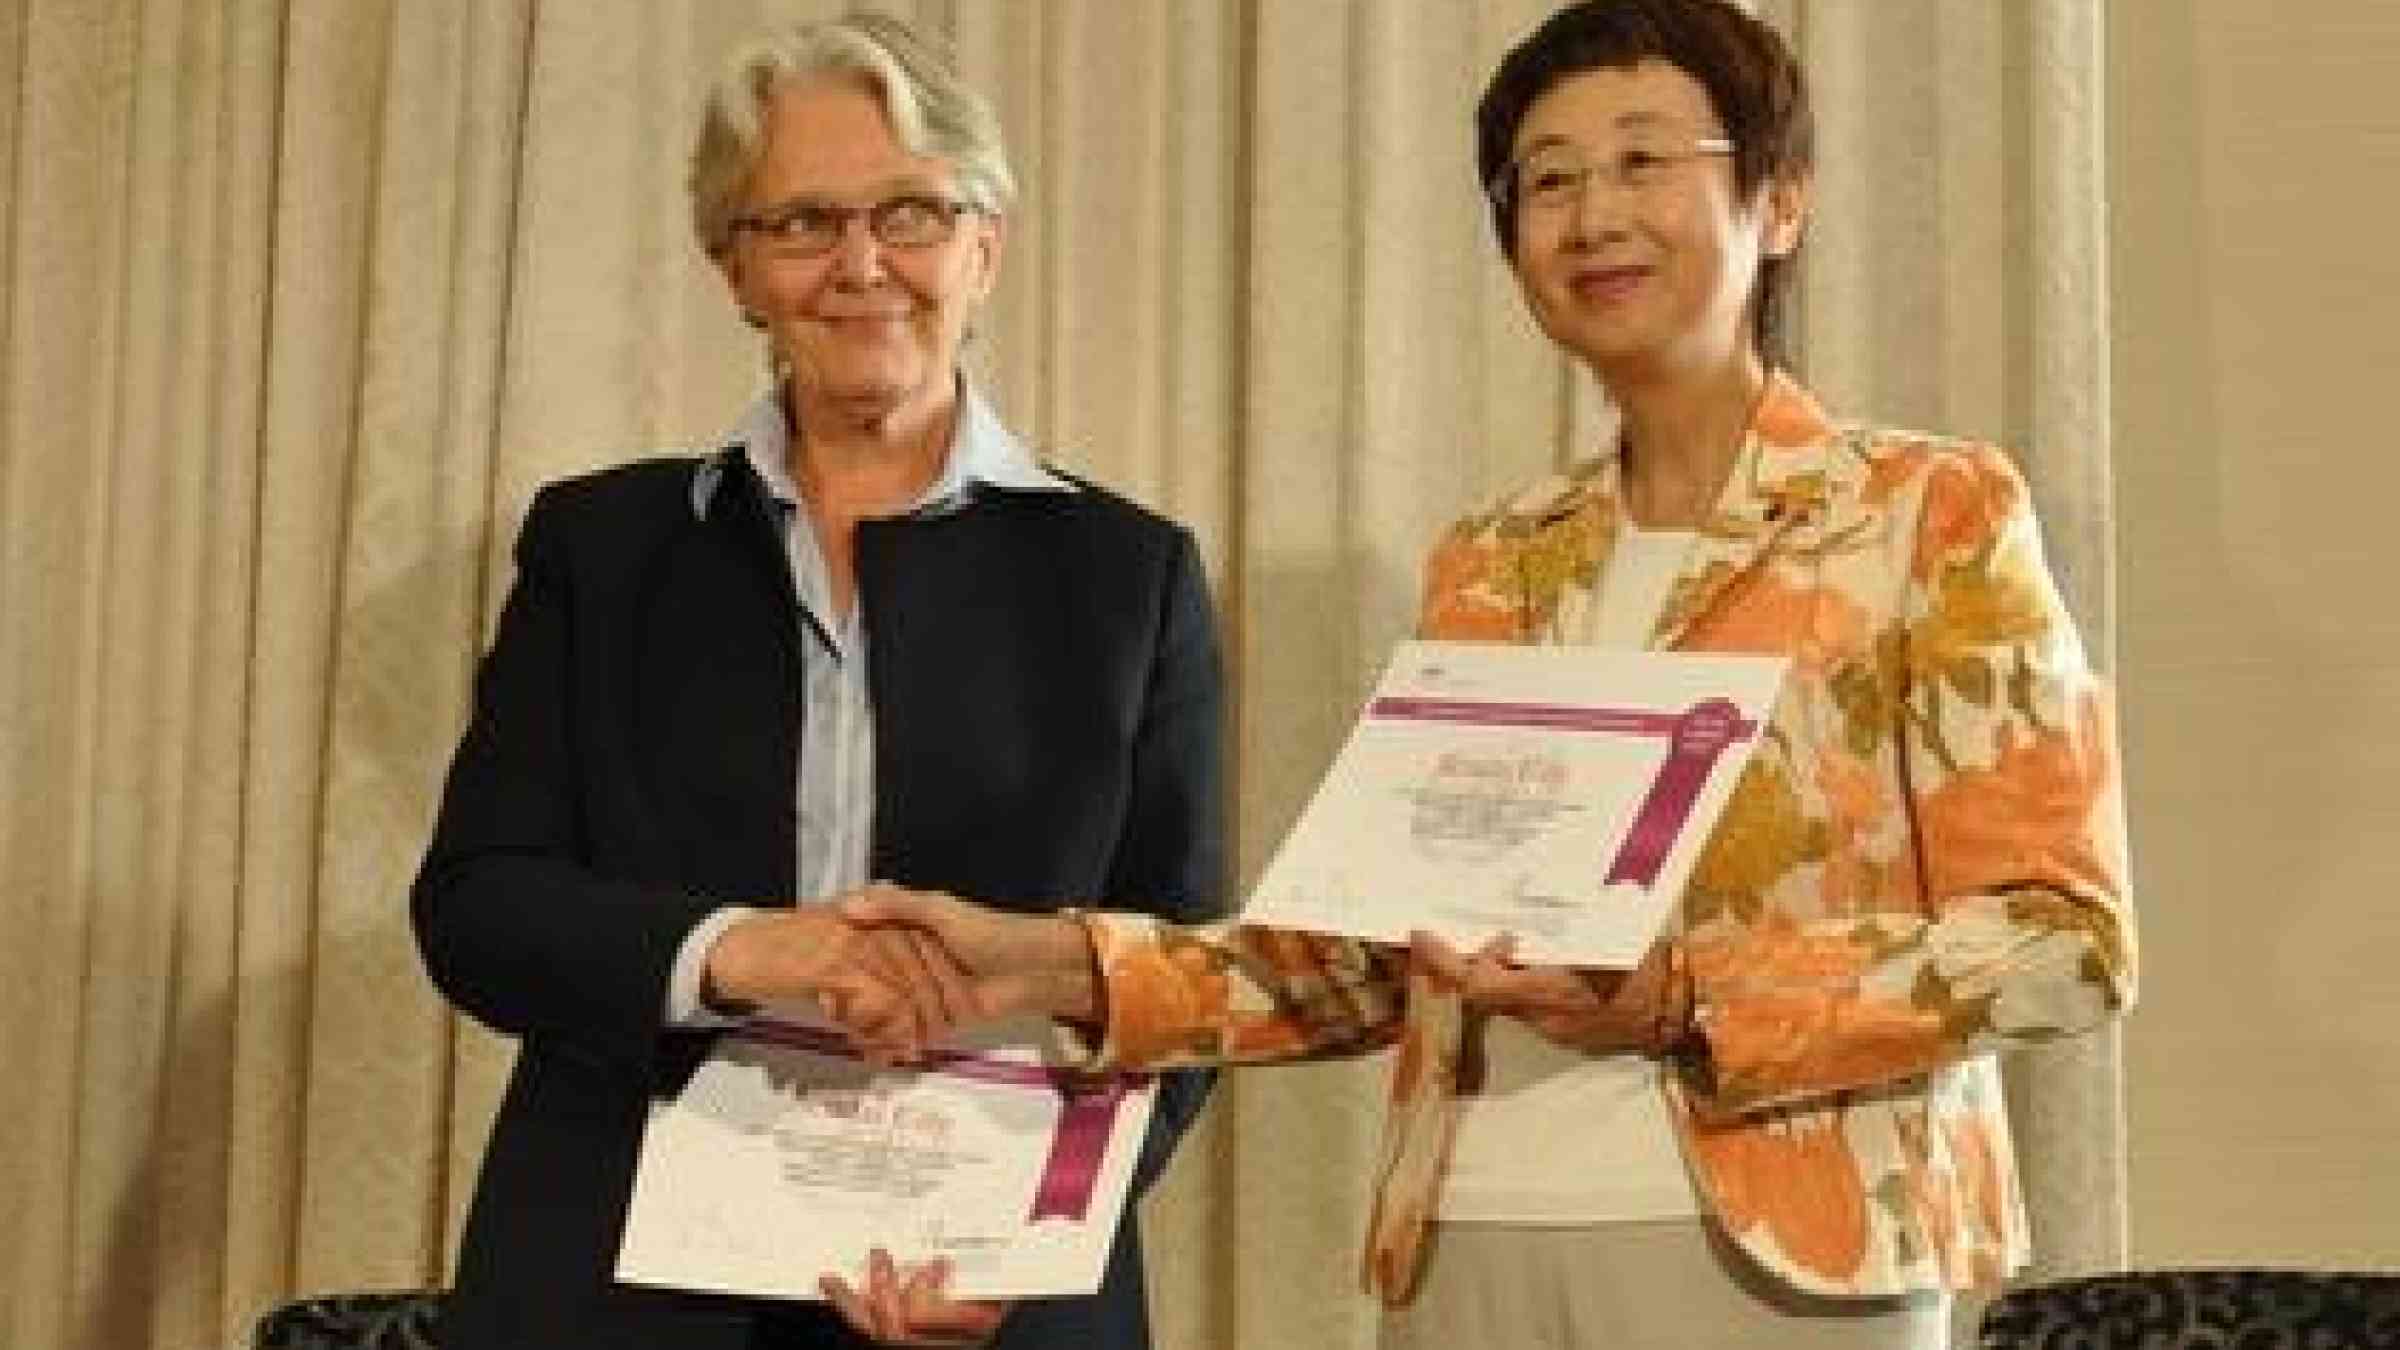 Just over a year ago, UNISDR Chief Margareta Wahlström welcomed the Mayor of Sendai, Emiko Okuyama, to the Making Cities Resilient Campaign with a certificate of recognition on the importance of political leadership in building disaster resilient societies.Today on the 3rd anniversary of the Great East Japan Earthquake, Mayor Okuyama, said the pace of recovery is speeding up.